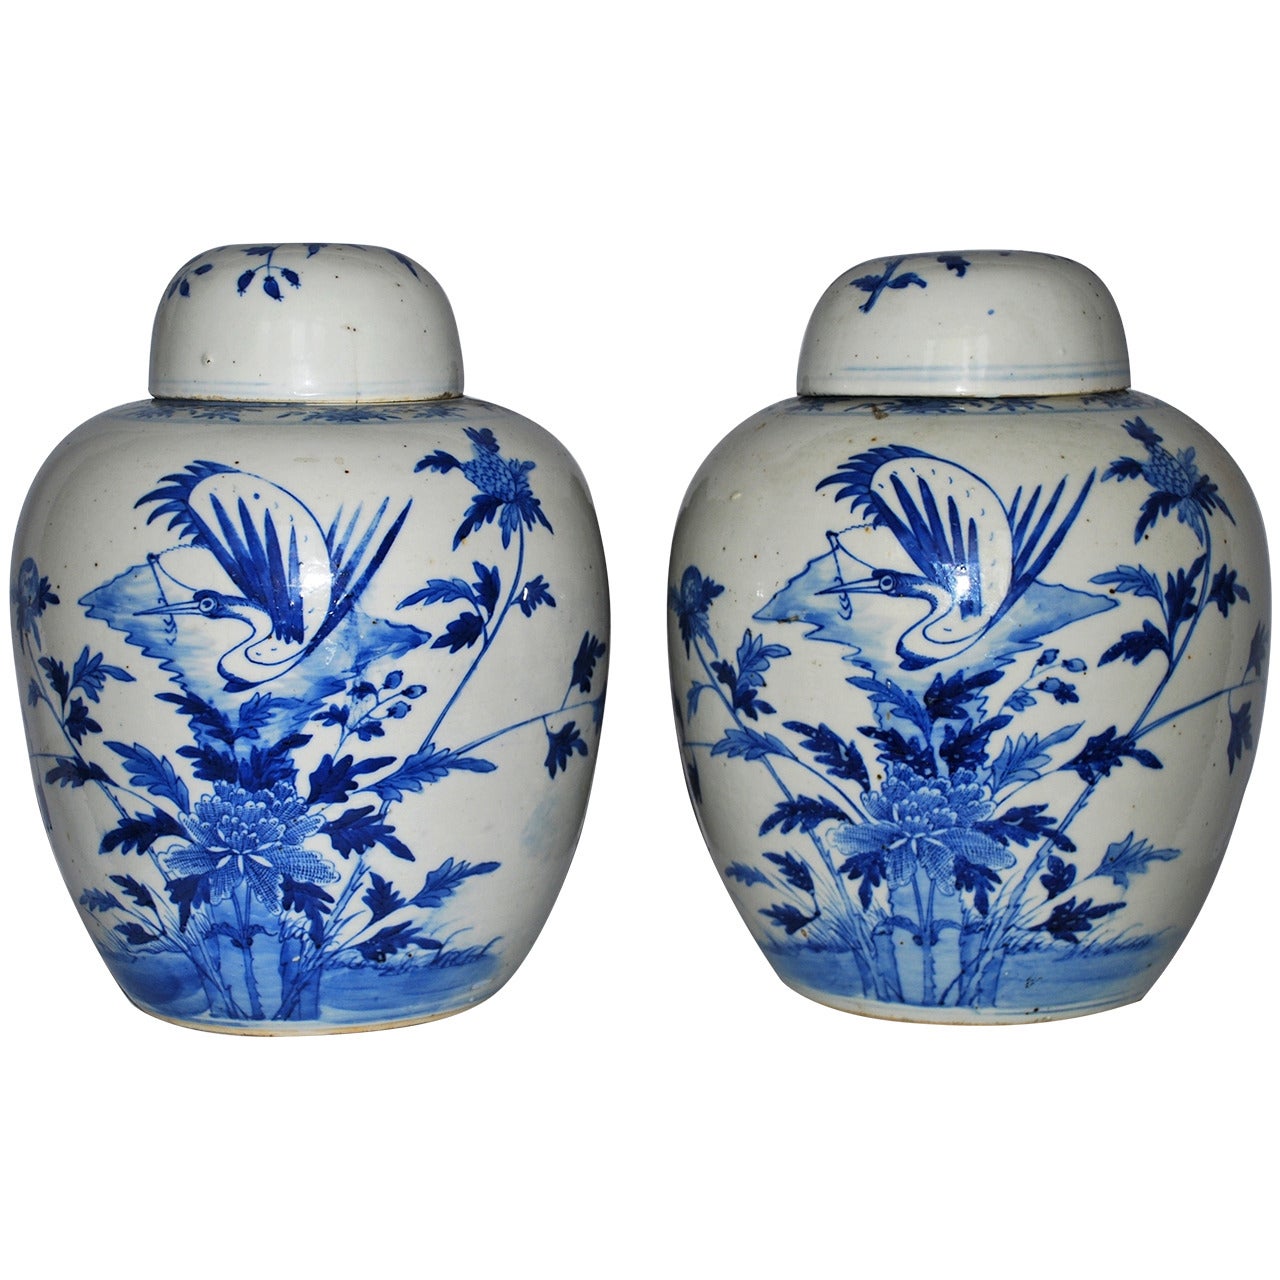 Pair of Vintage Blue and White Ginger Jars